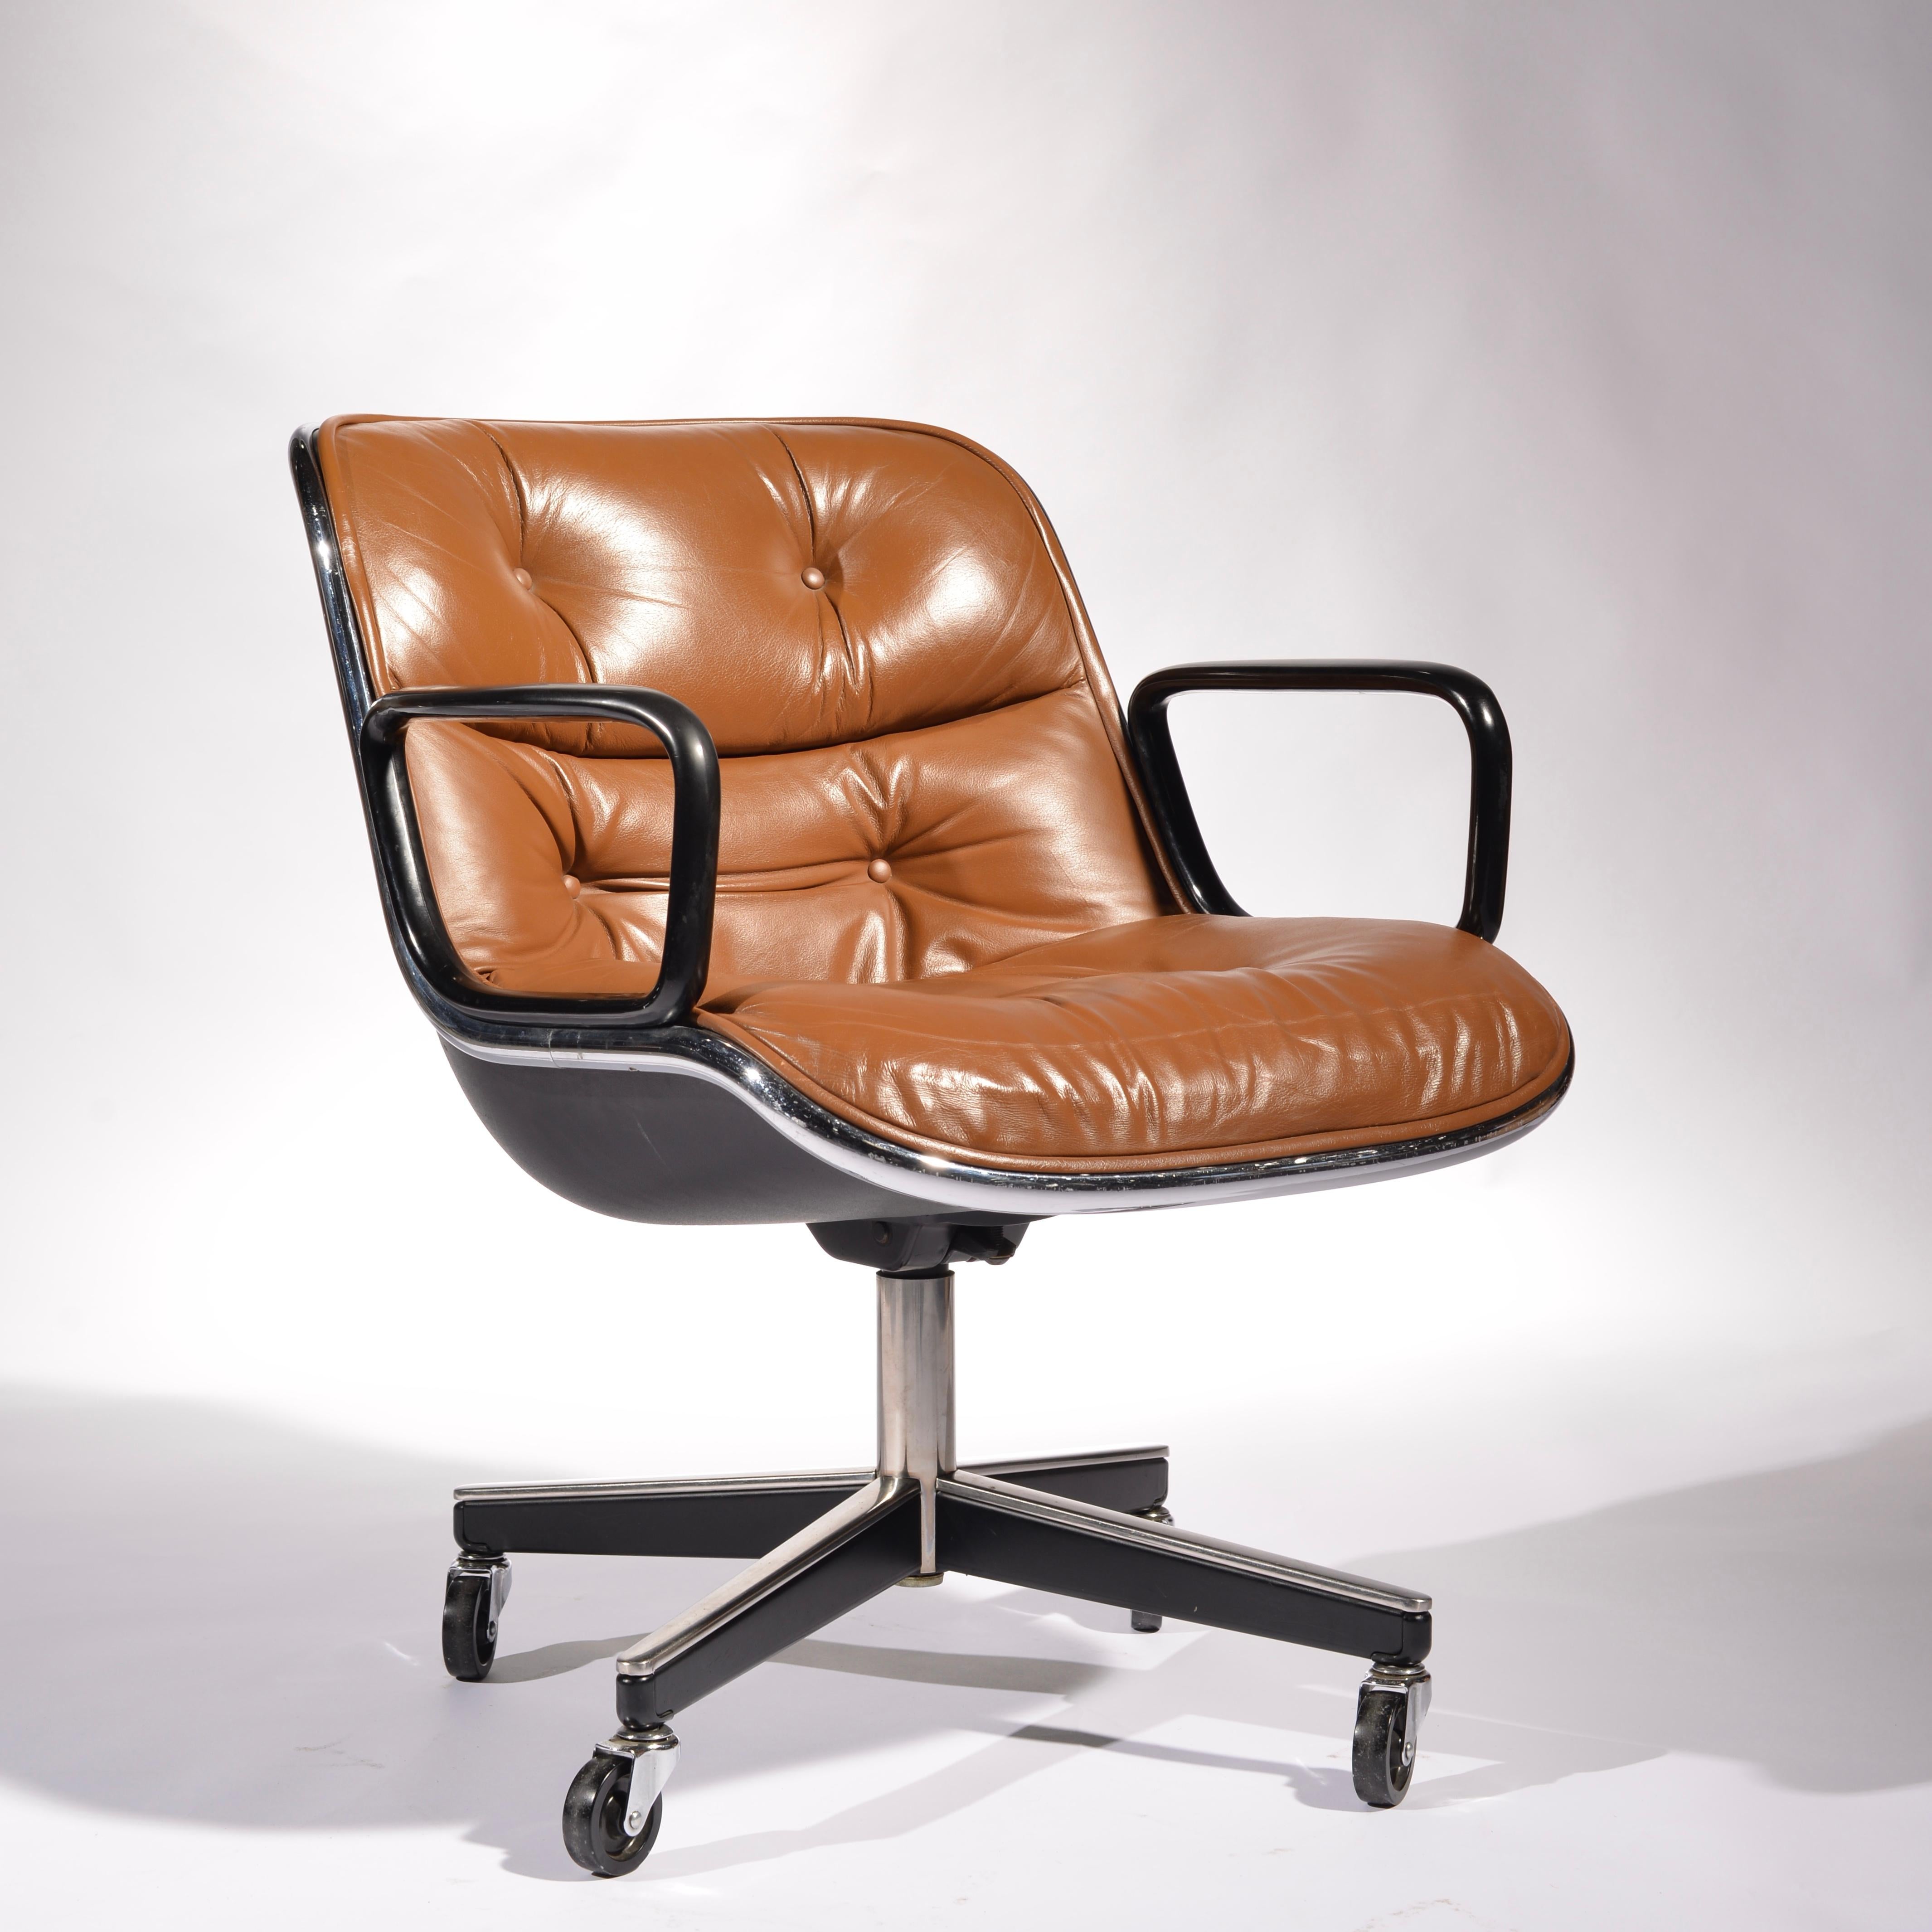 Mid-20th Century 10 Charles Pollock Executive Desk Chairs for Knoll in Cognac Leather